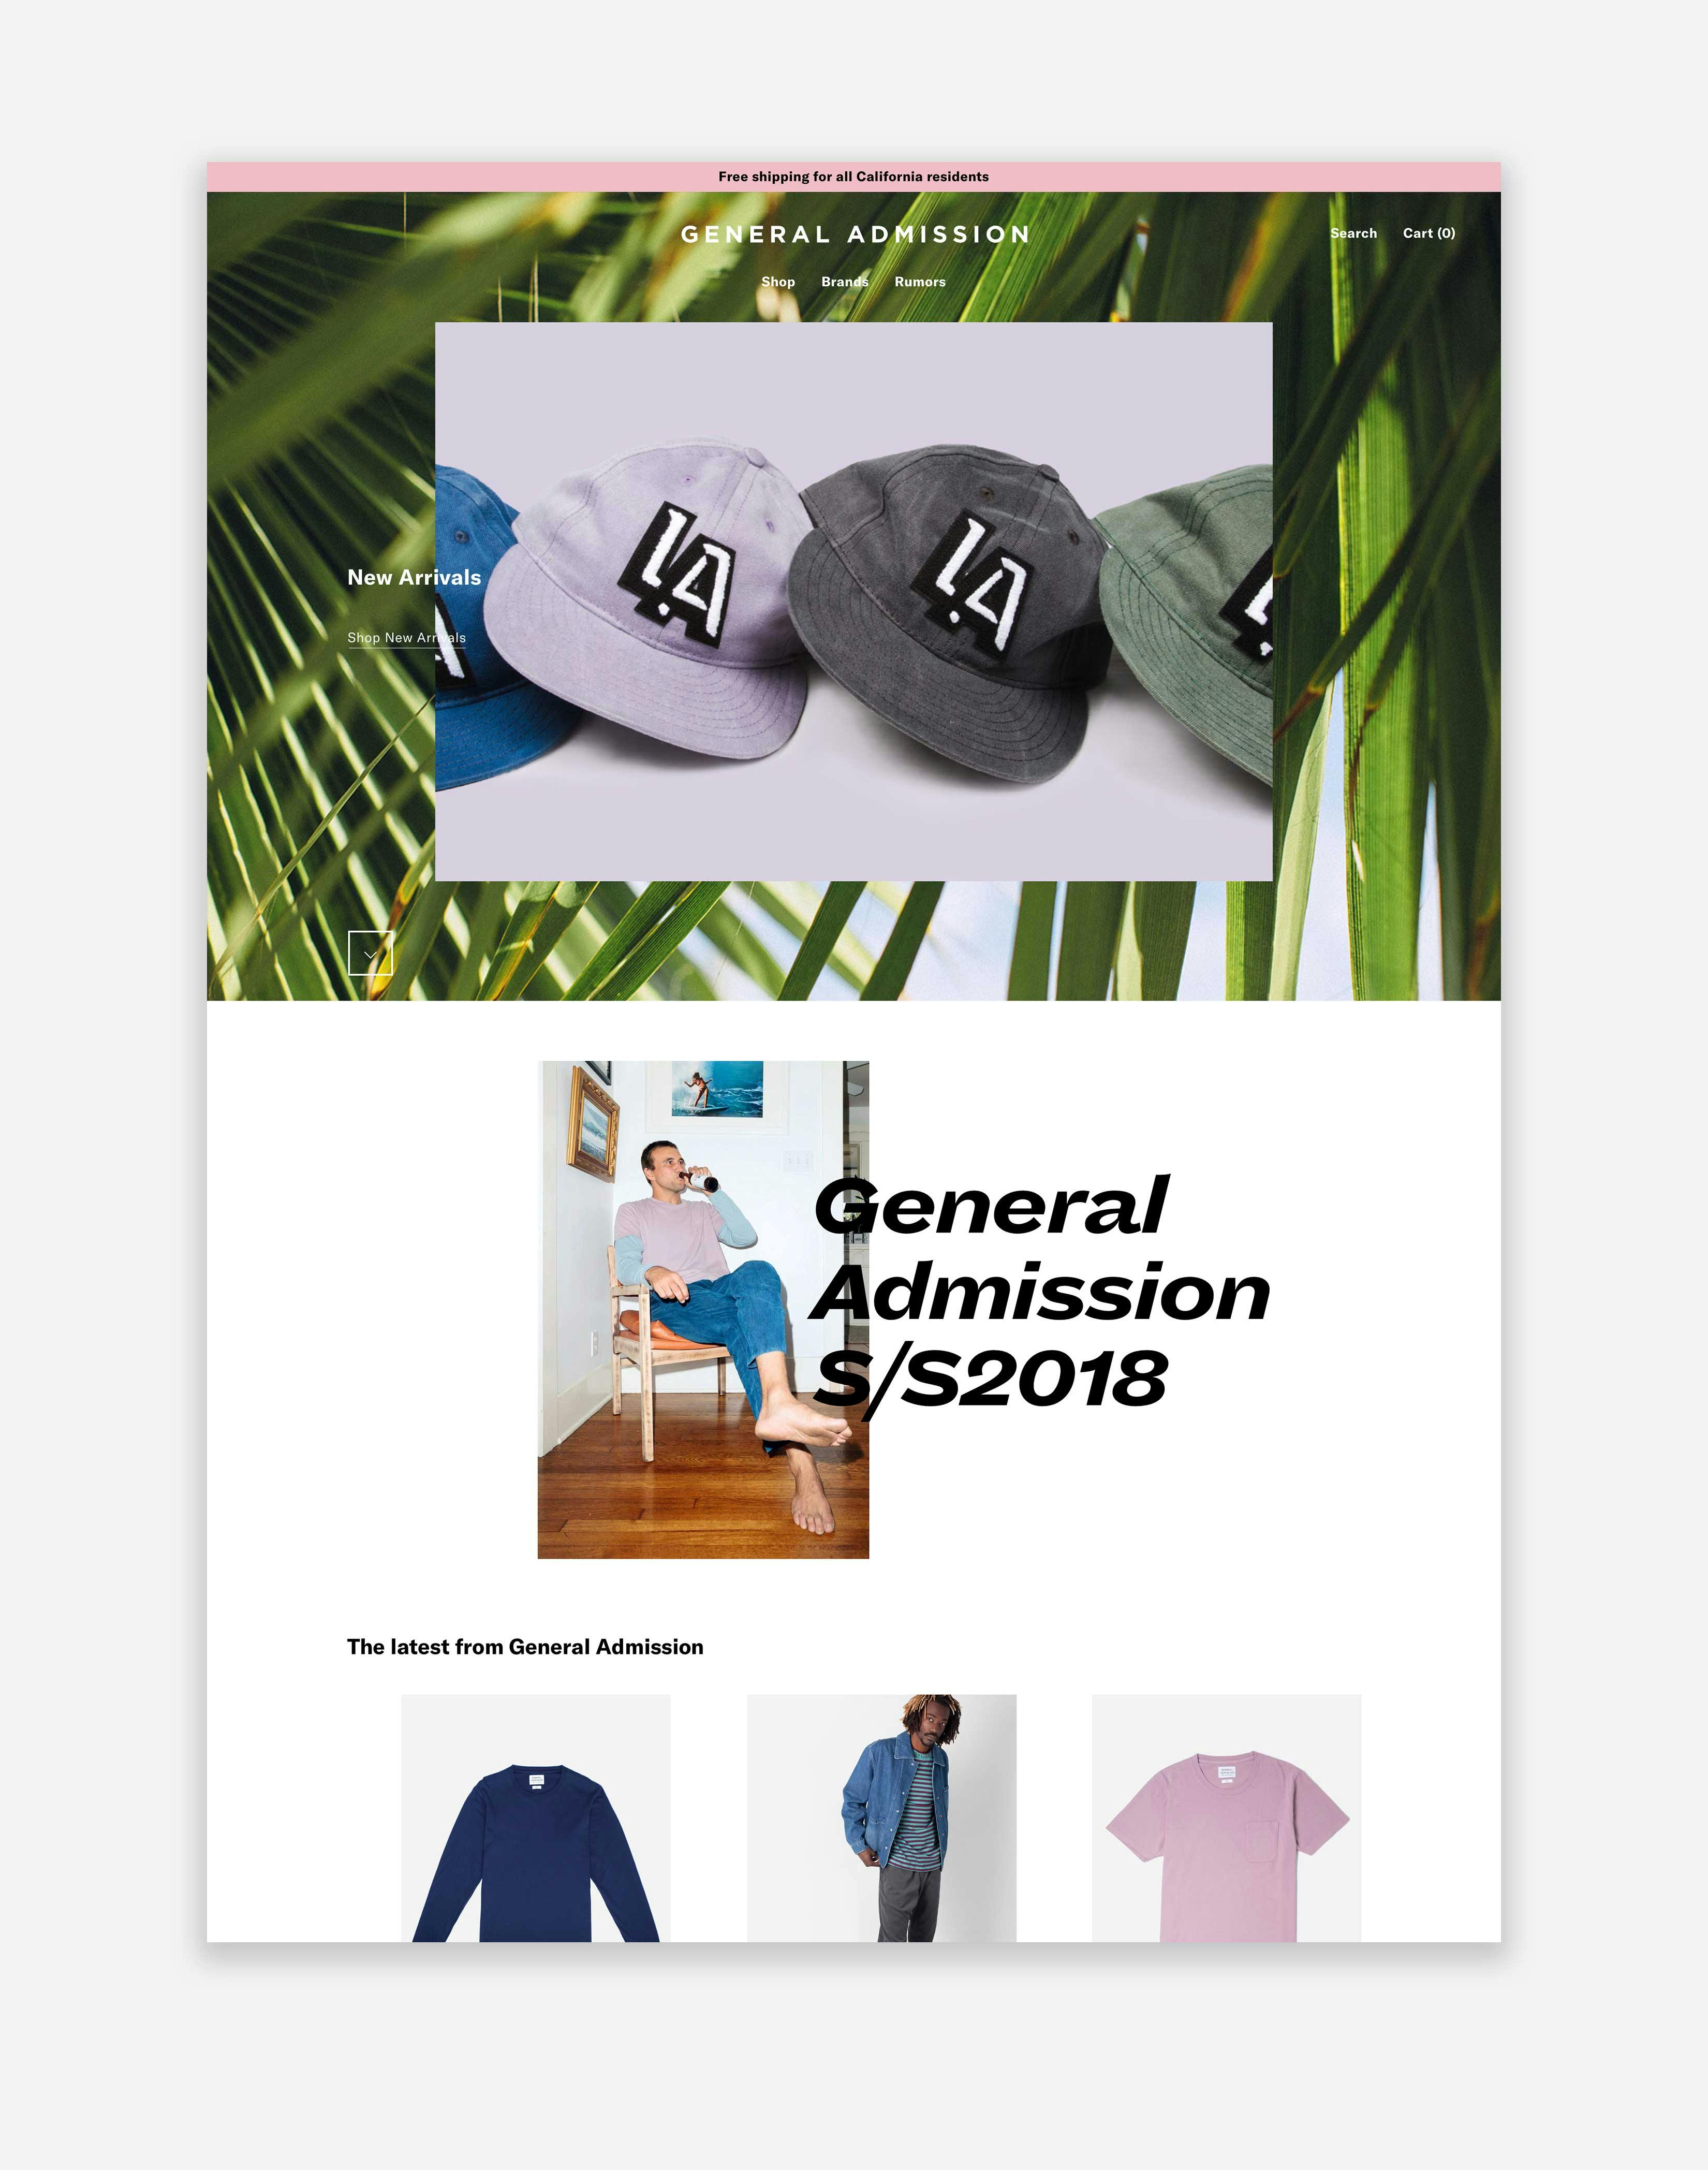 General Admission's homepage